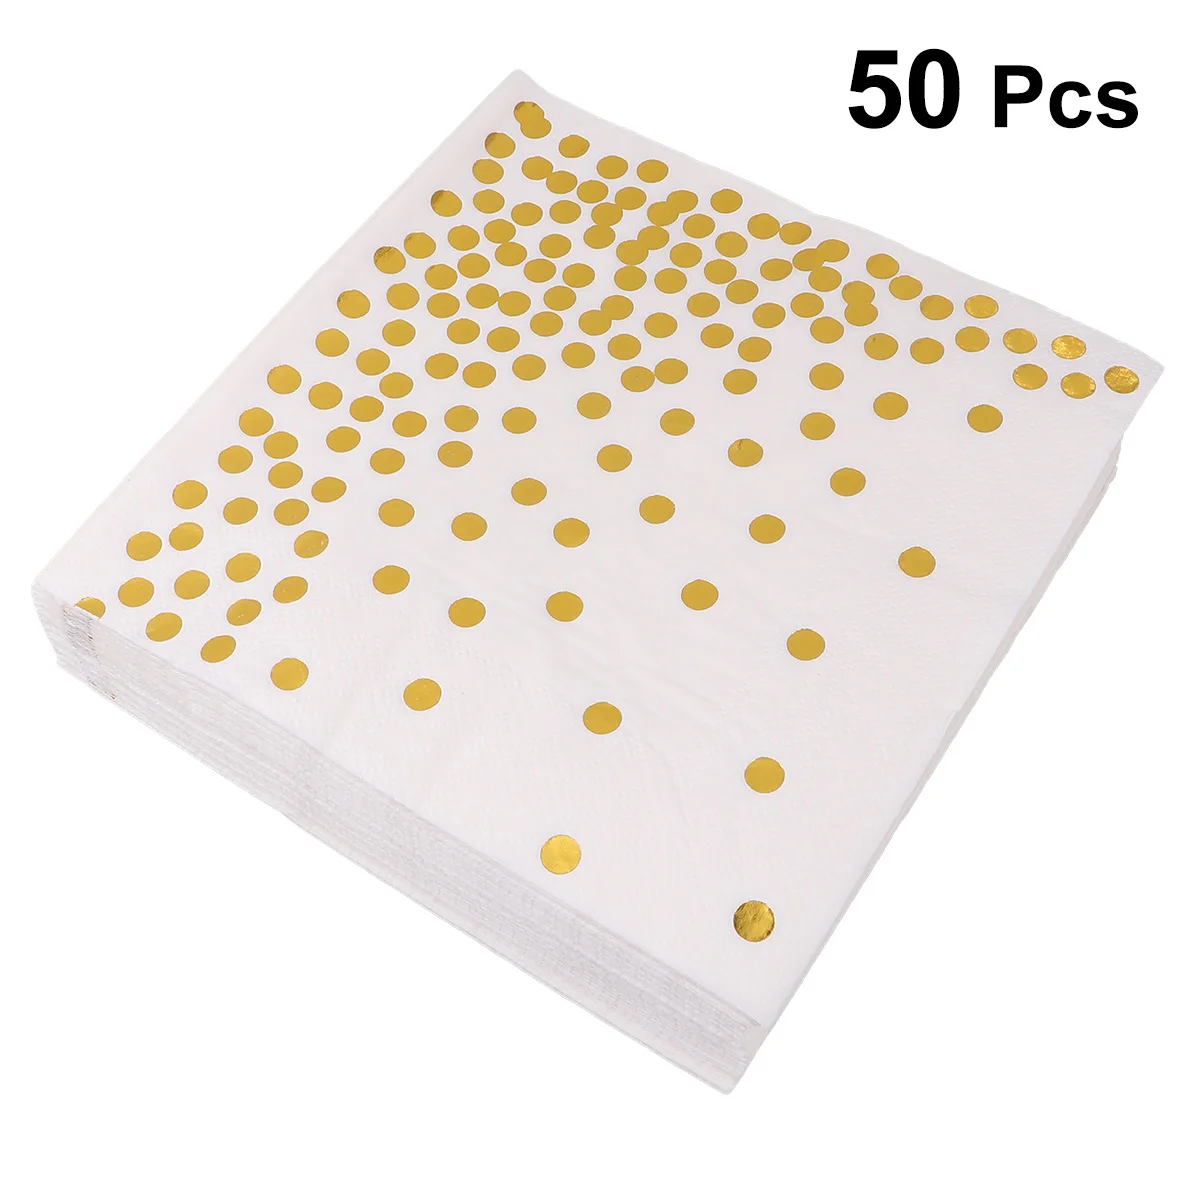 

50 pcs Disposable Napkins Polka-dot Paper Towel Tissue Party Supplies for Hotel Restaurant